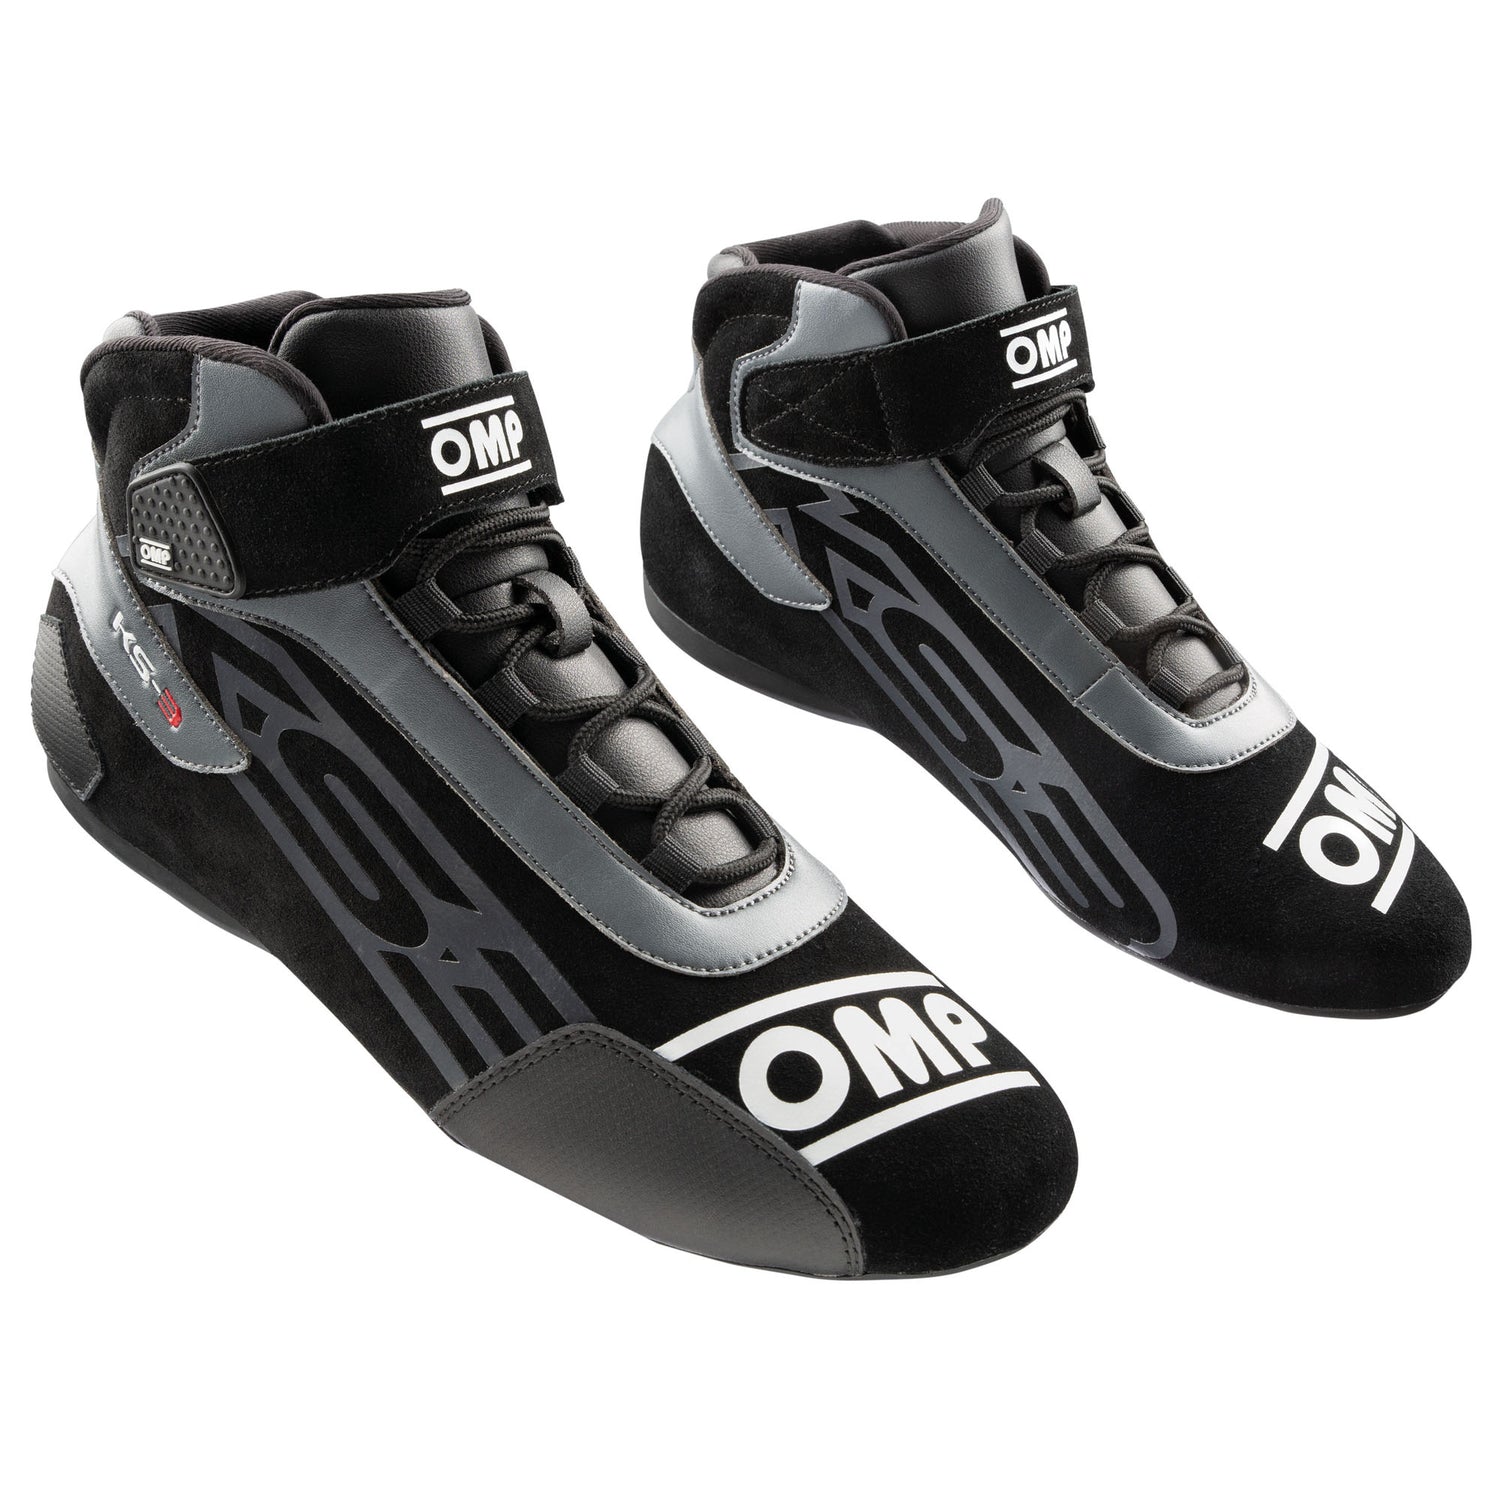 OMP KARTING BOOTS